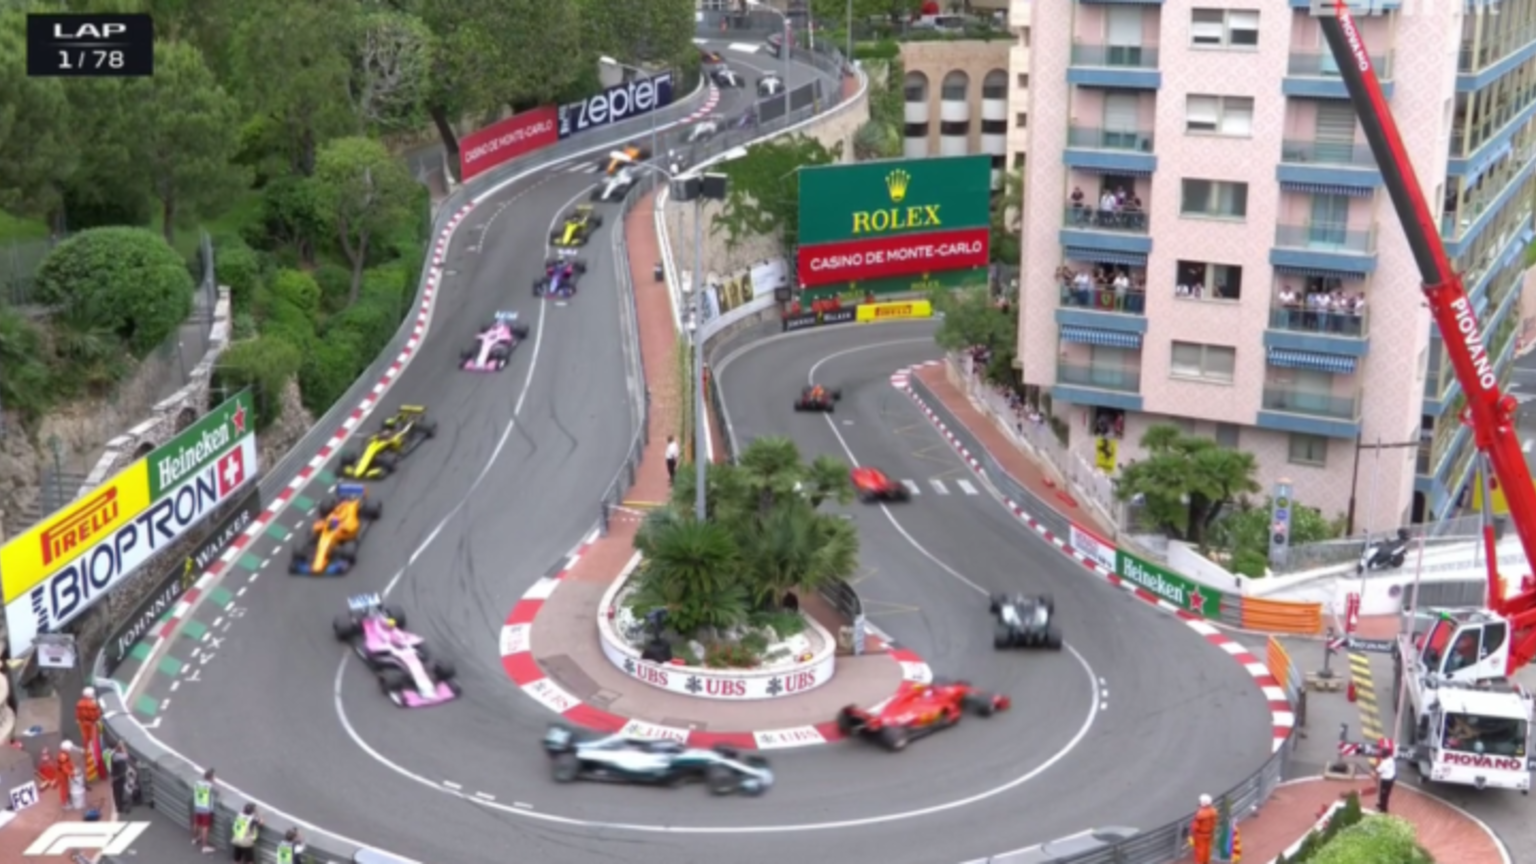 How to Watch the 2022 F1 Monaco Grand Prix Live For Free Without Cable